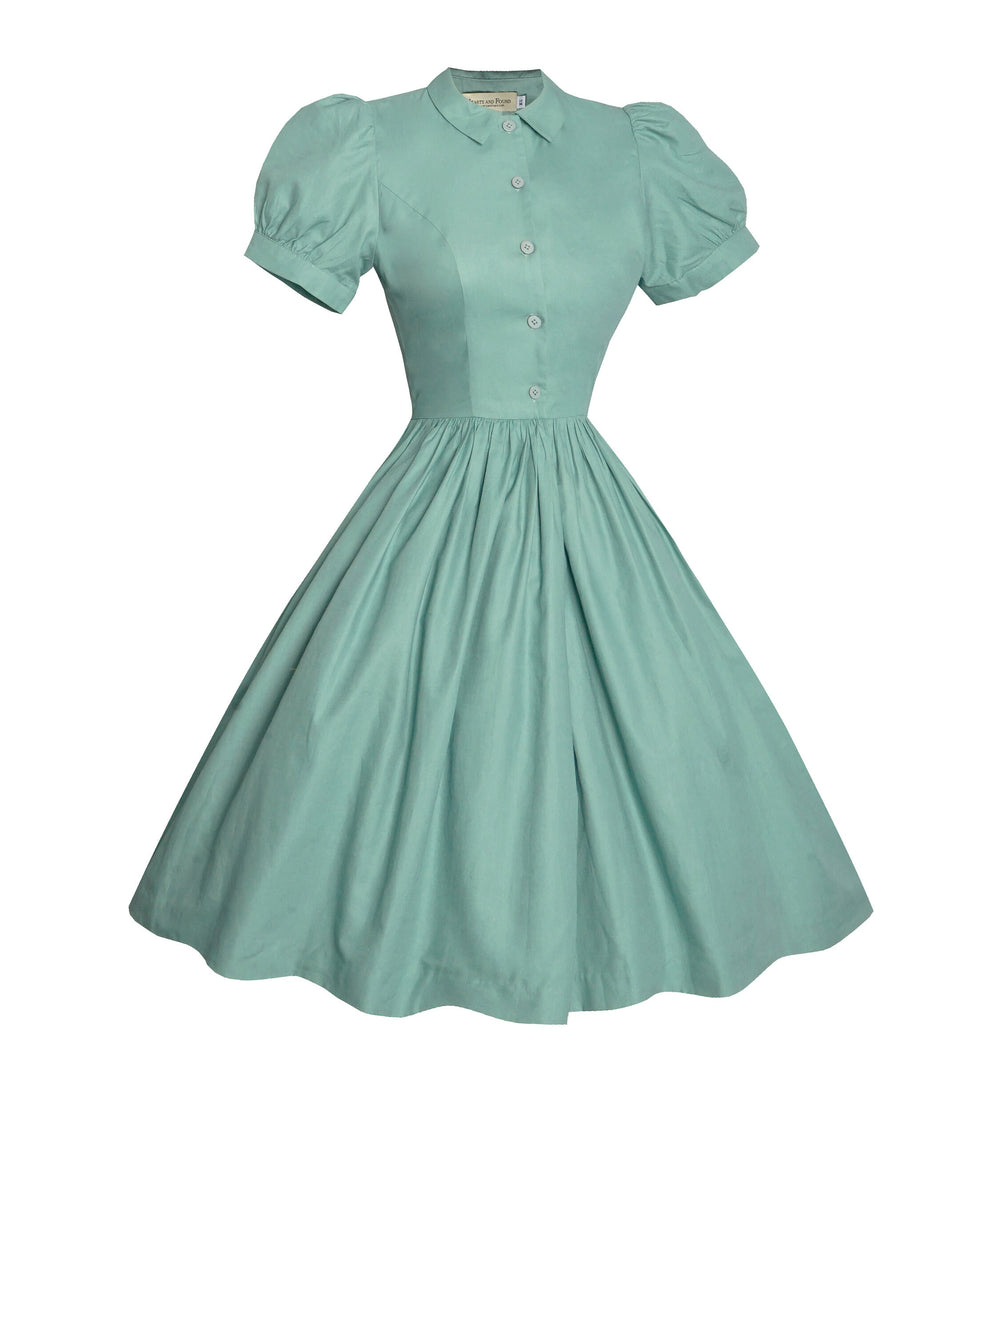 RTS - Size XS - Judy Dress in Jade Green Cotton